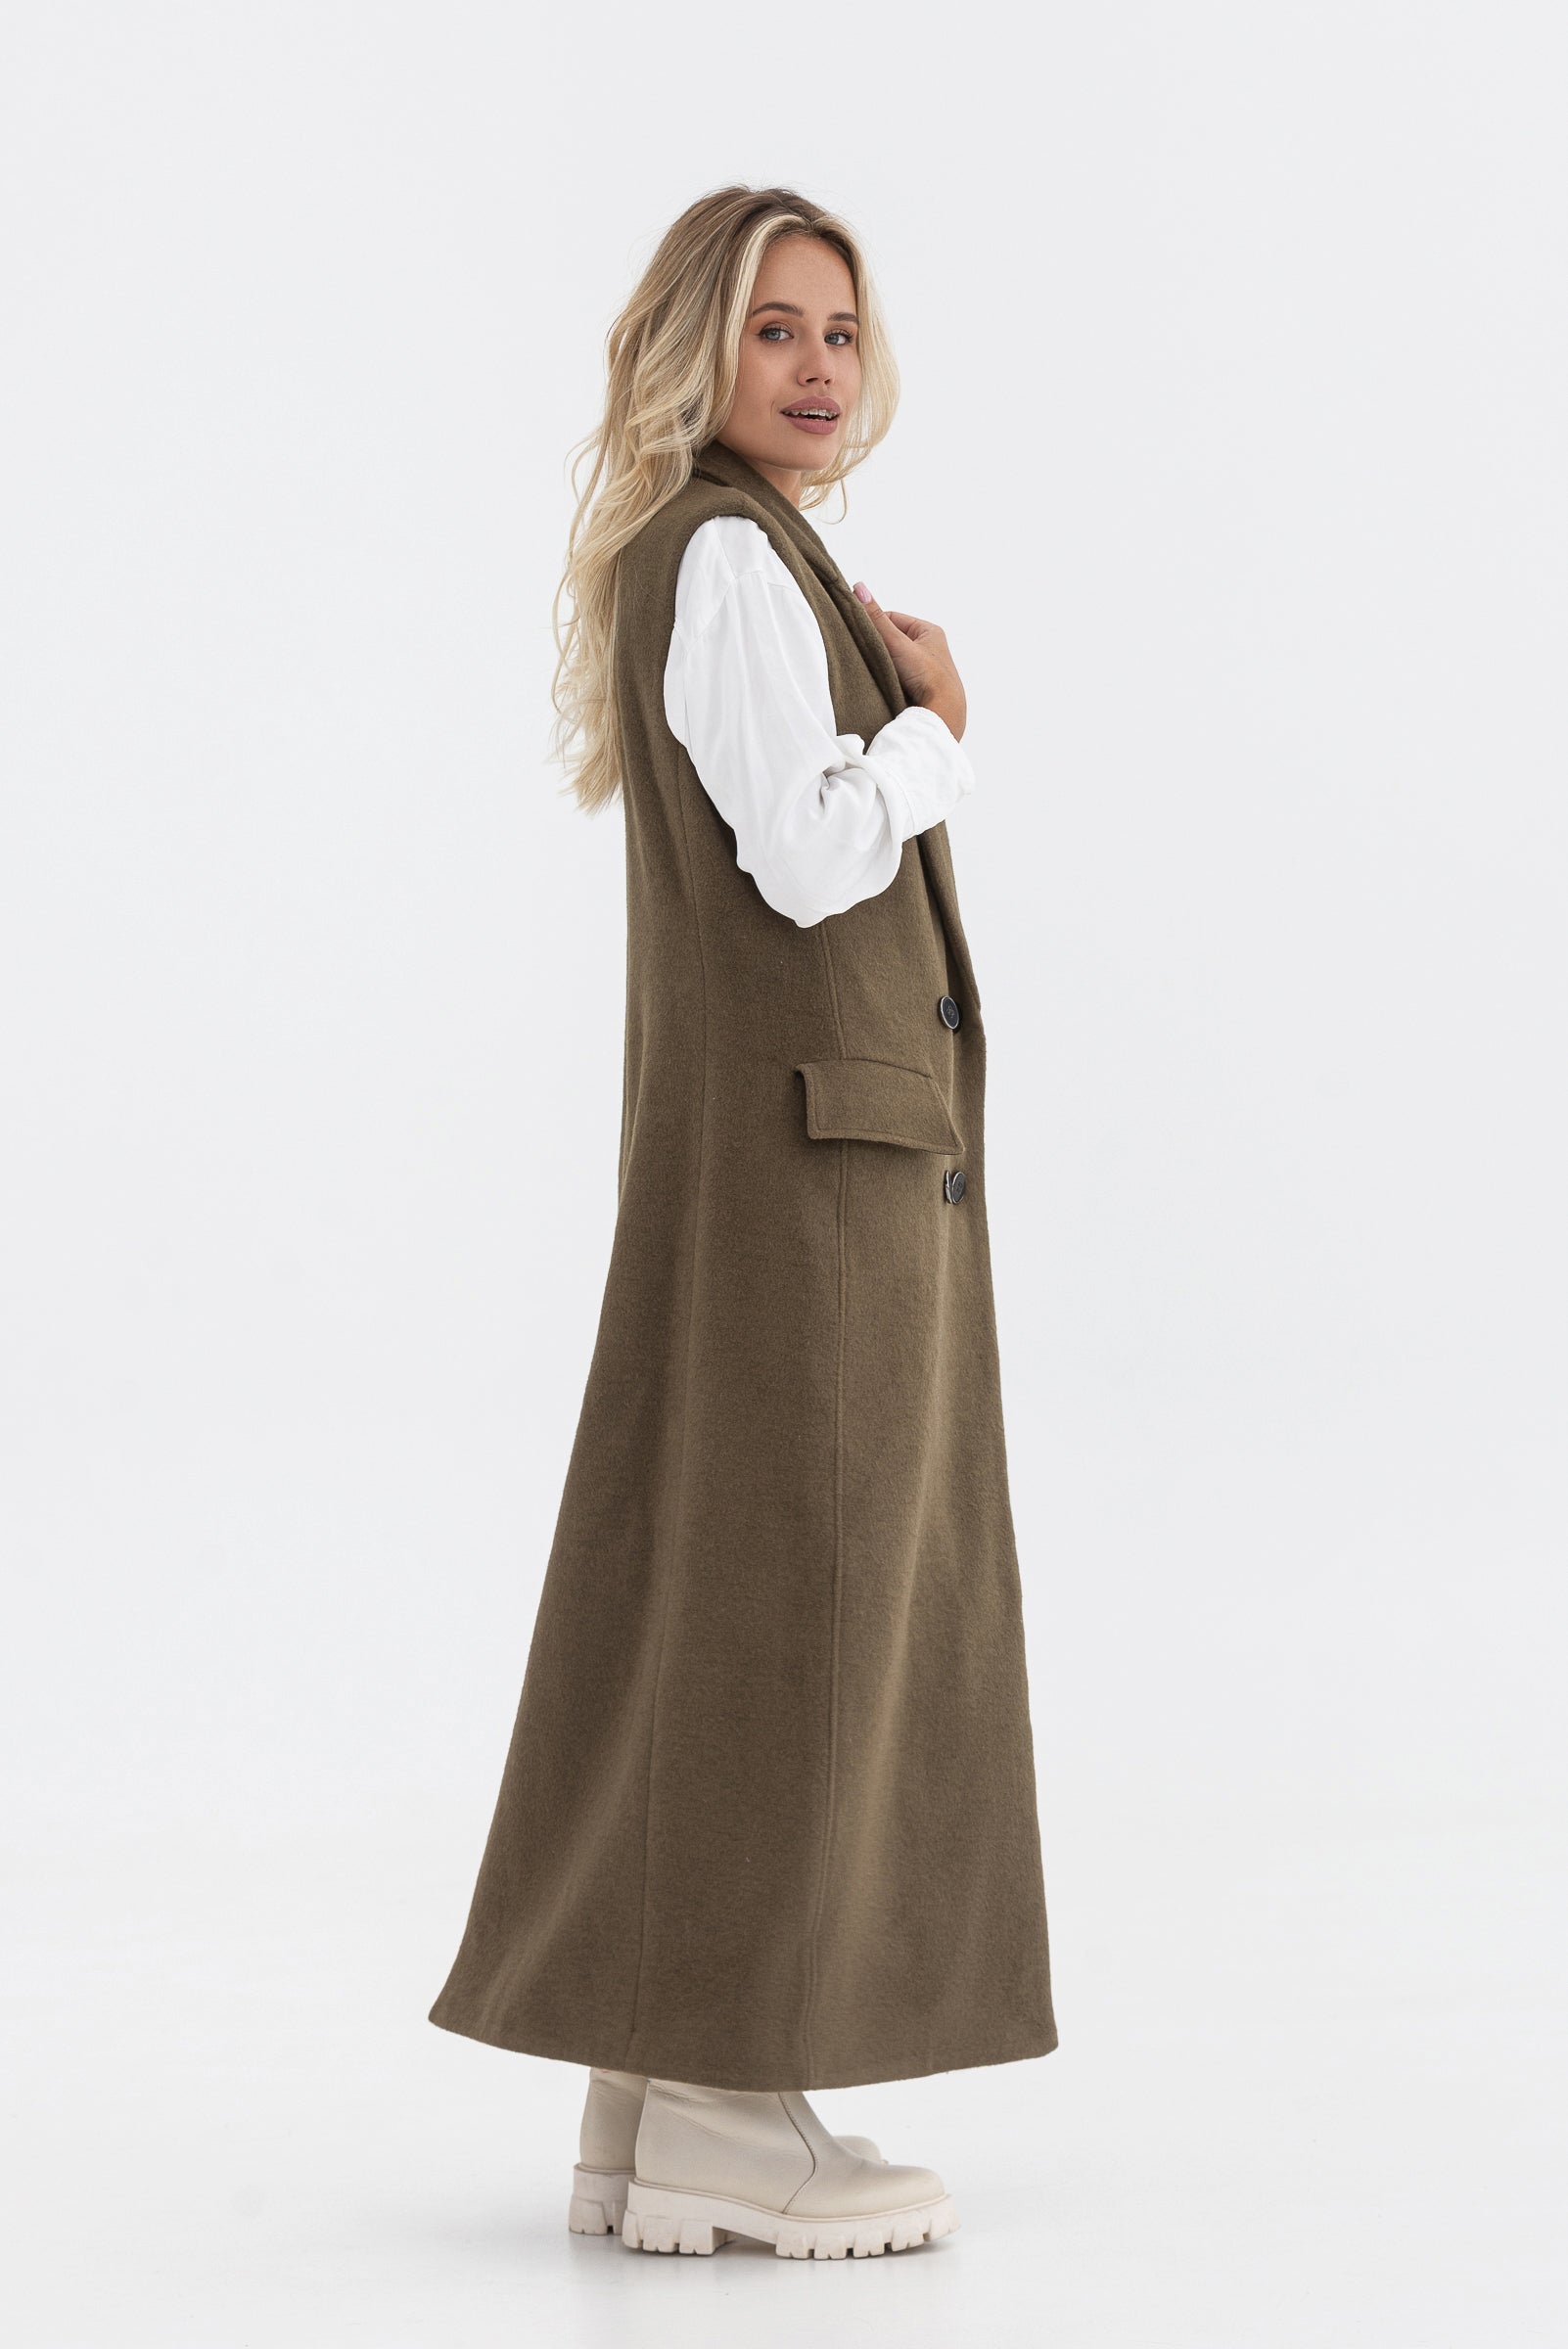 Sleeveless trench coat. Long. Buttoned.